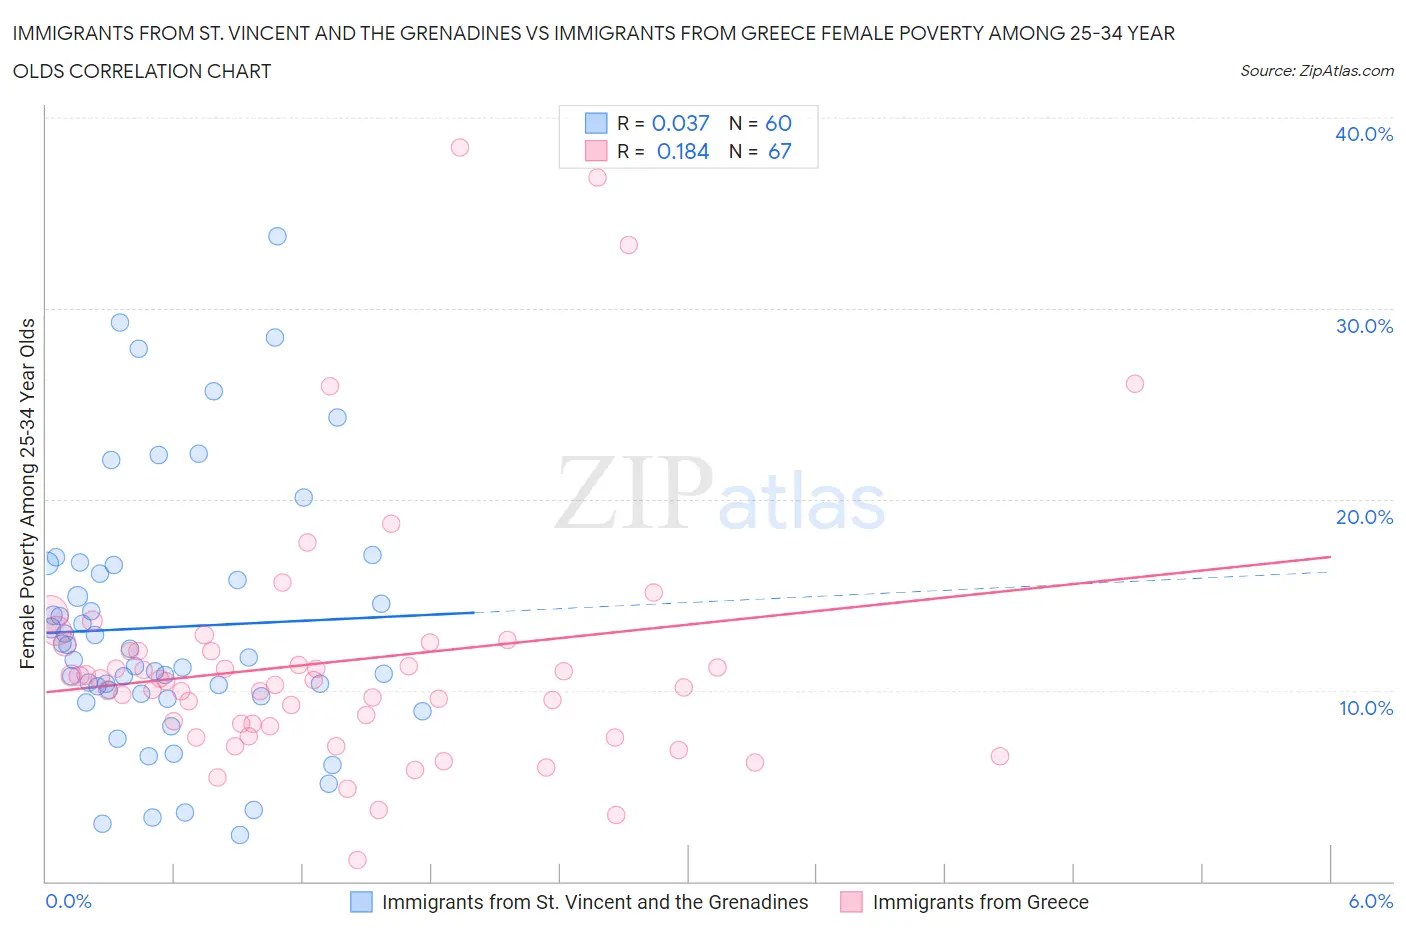 Immigrants from St. Vincent and the Grenadines vs Immigrants from Greece Female Poverty Among 25-34 Year Olds